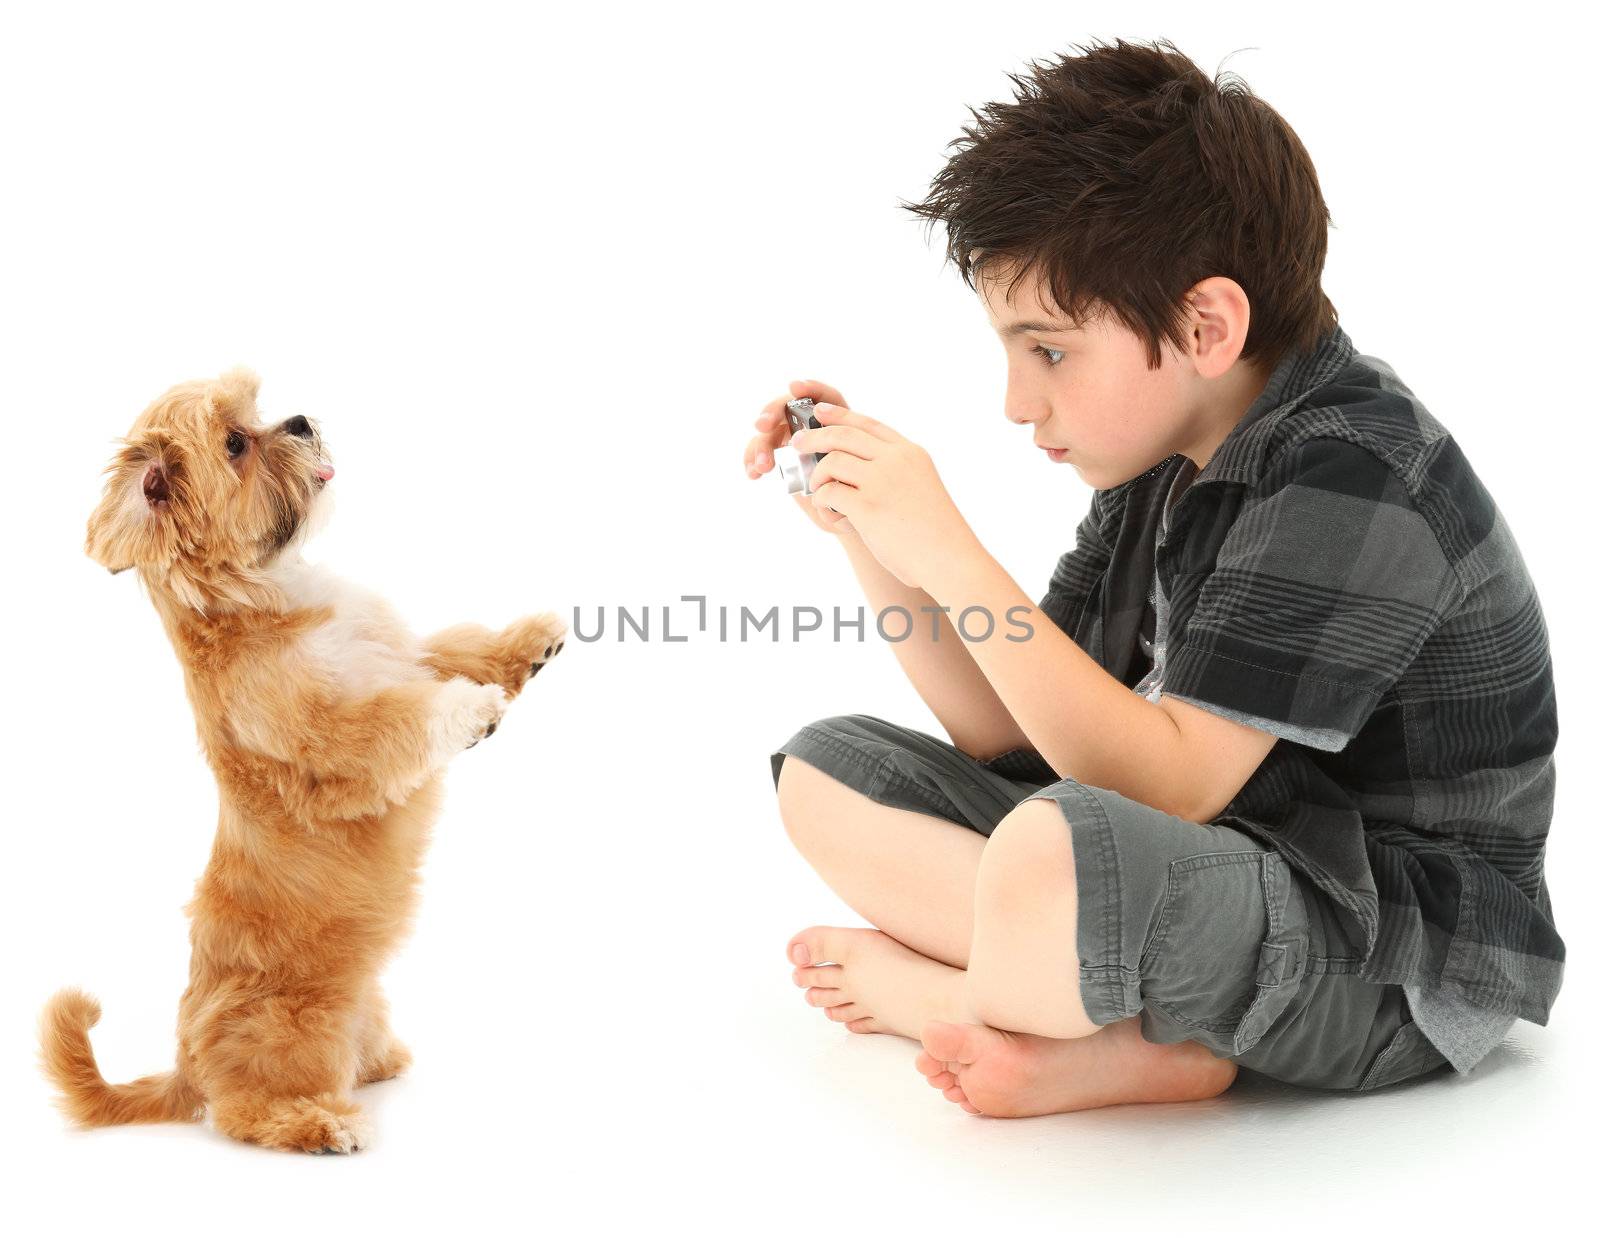 Boy Shooting Photos of His Dog with Digital Camera by duplass